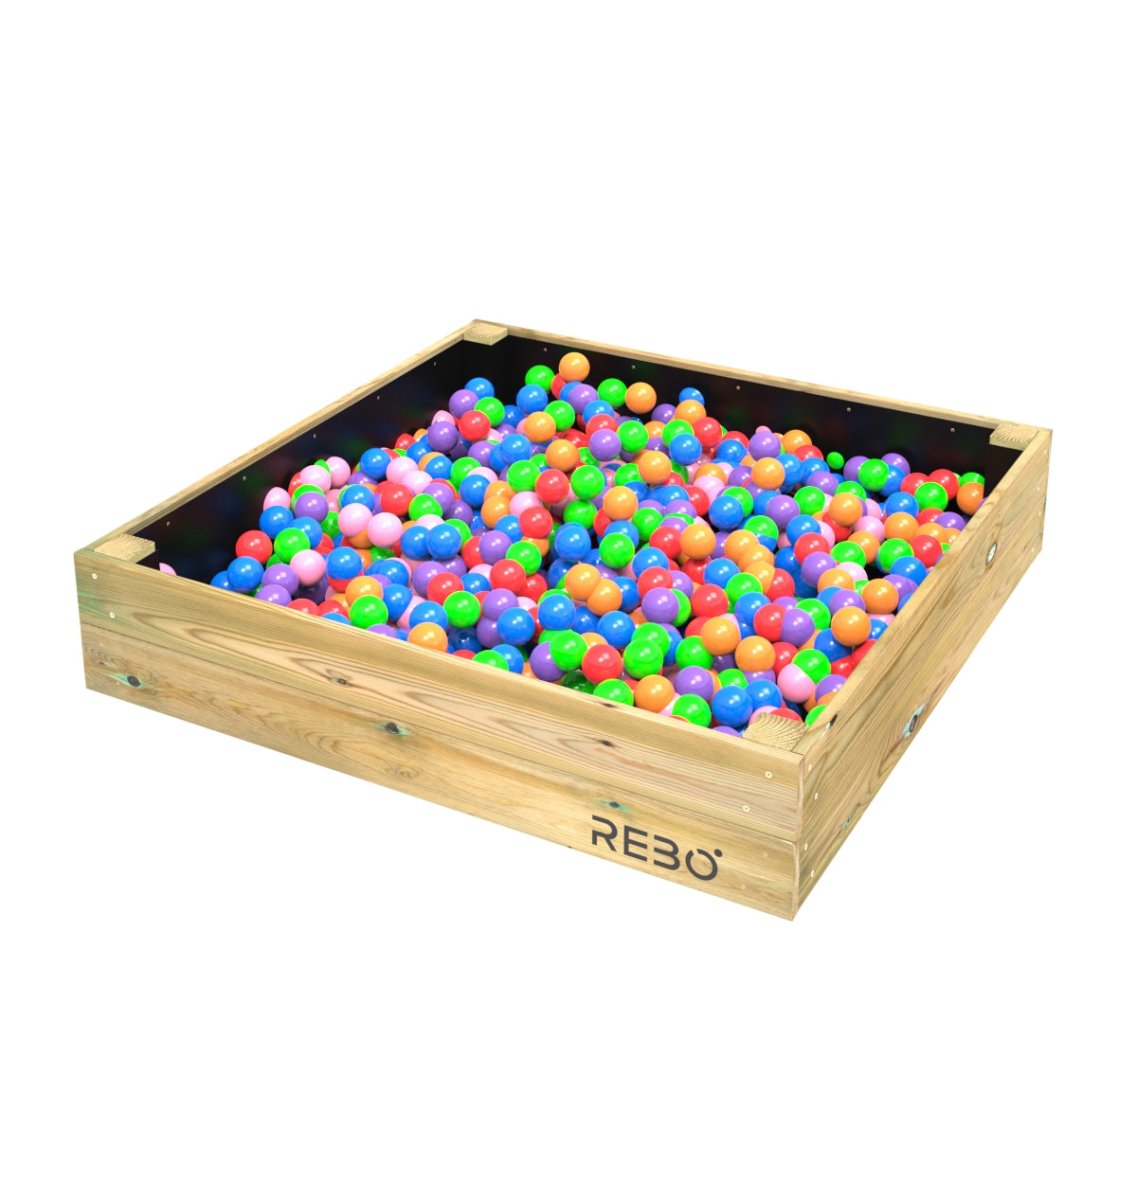 Rebo Wooden Sandpit Ball Pool with Removable Lid – 120cm x 120cm